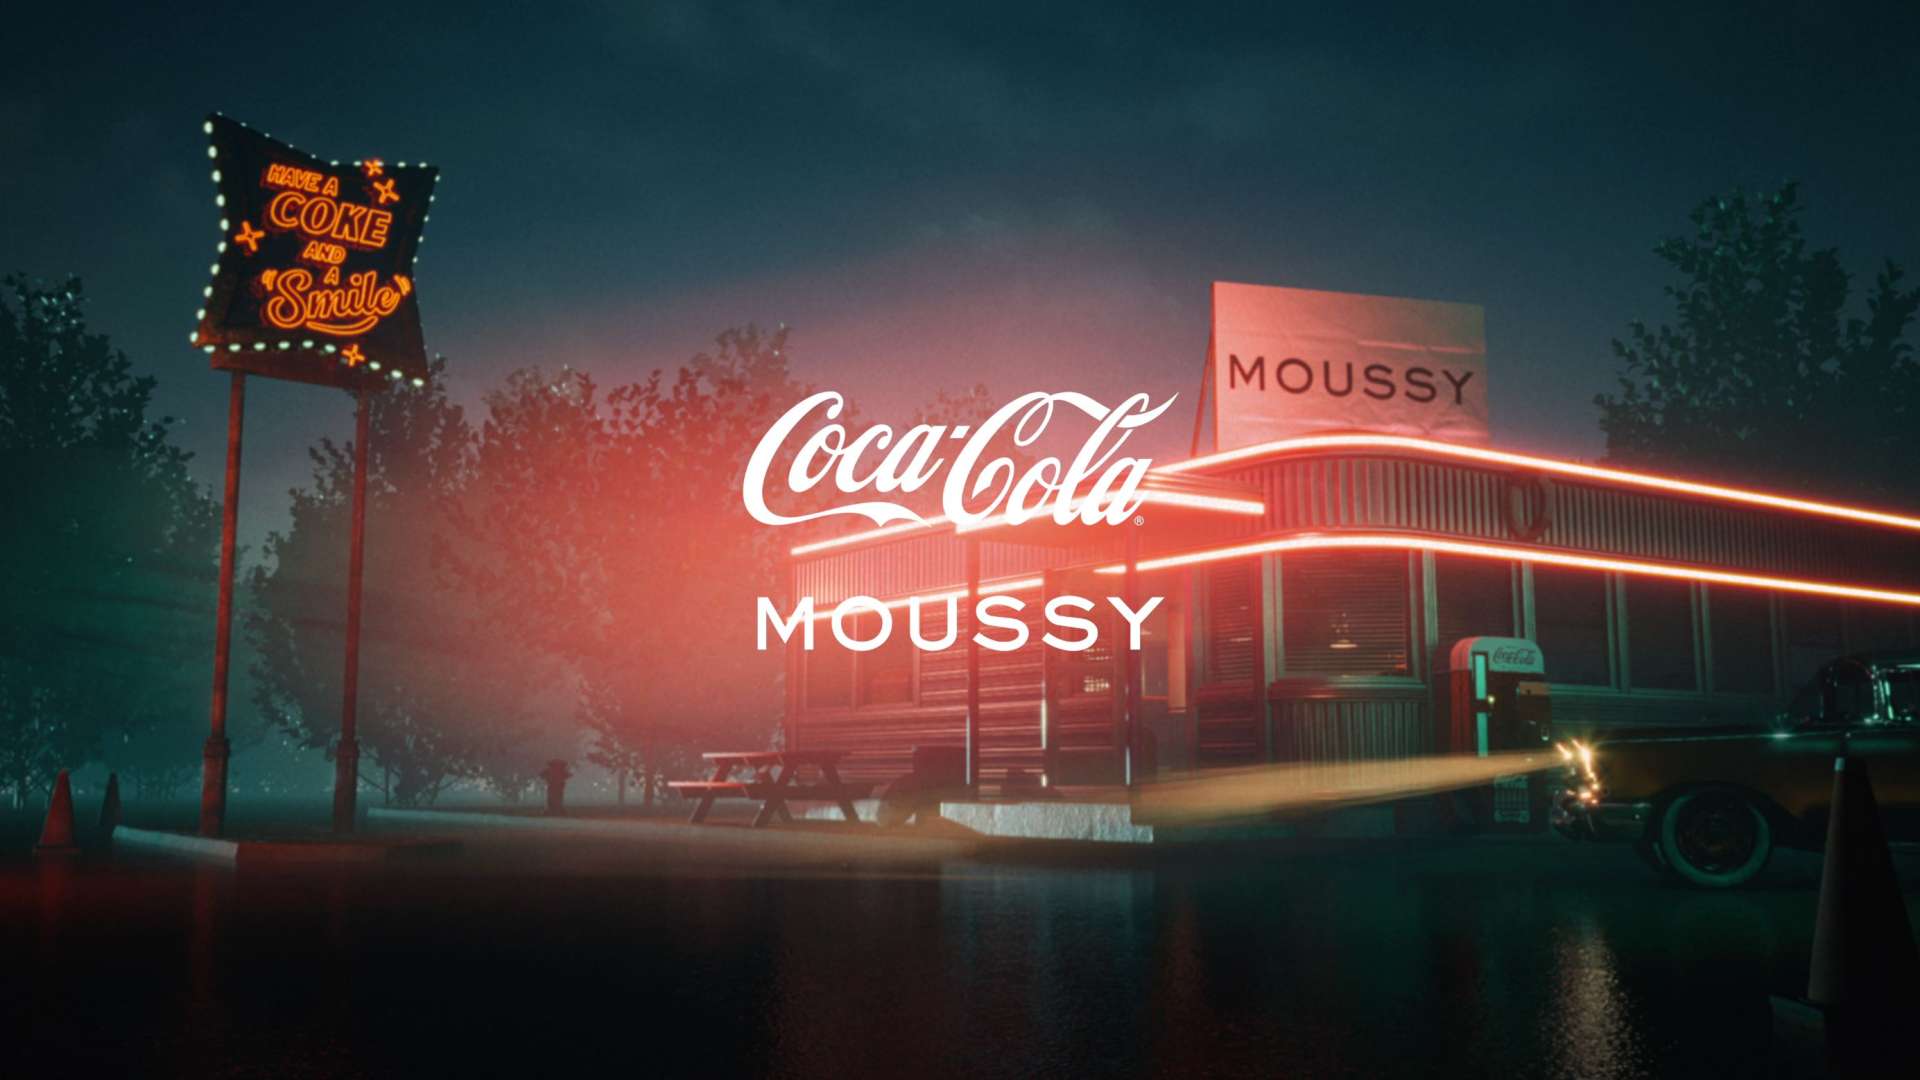 HAVE A COKE AND MOUSSY